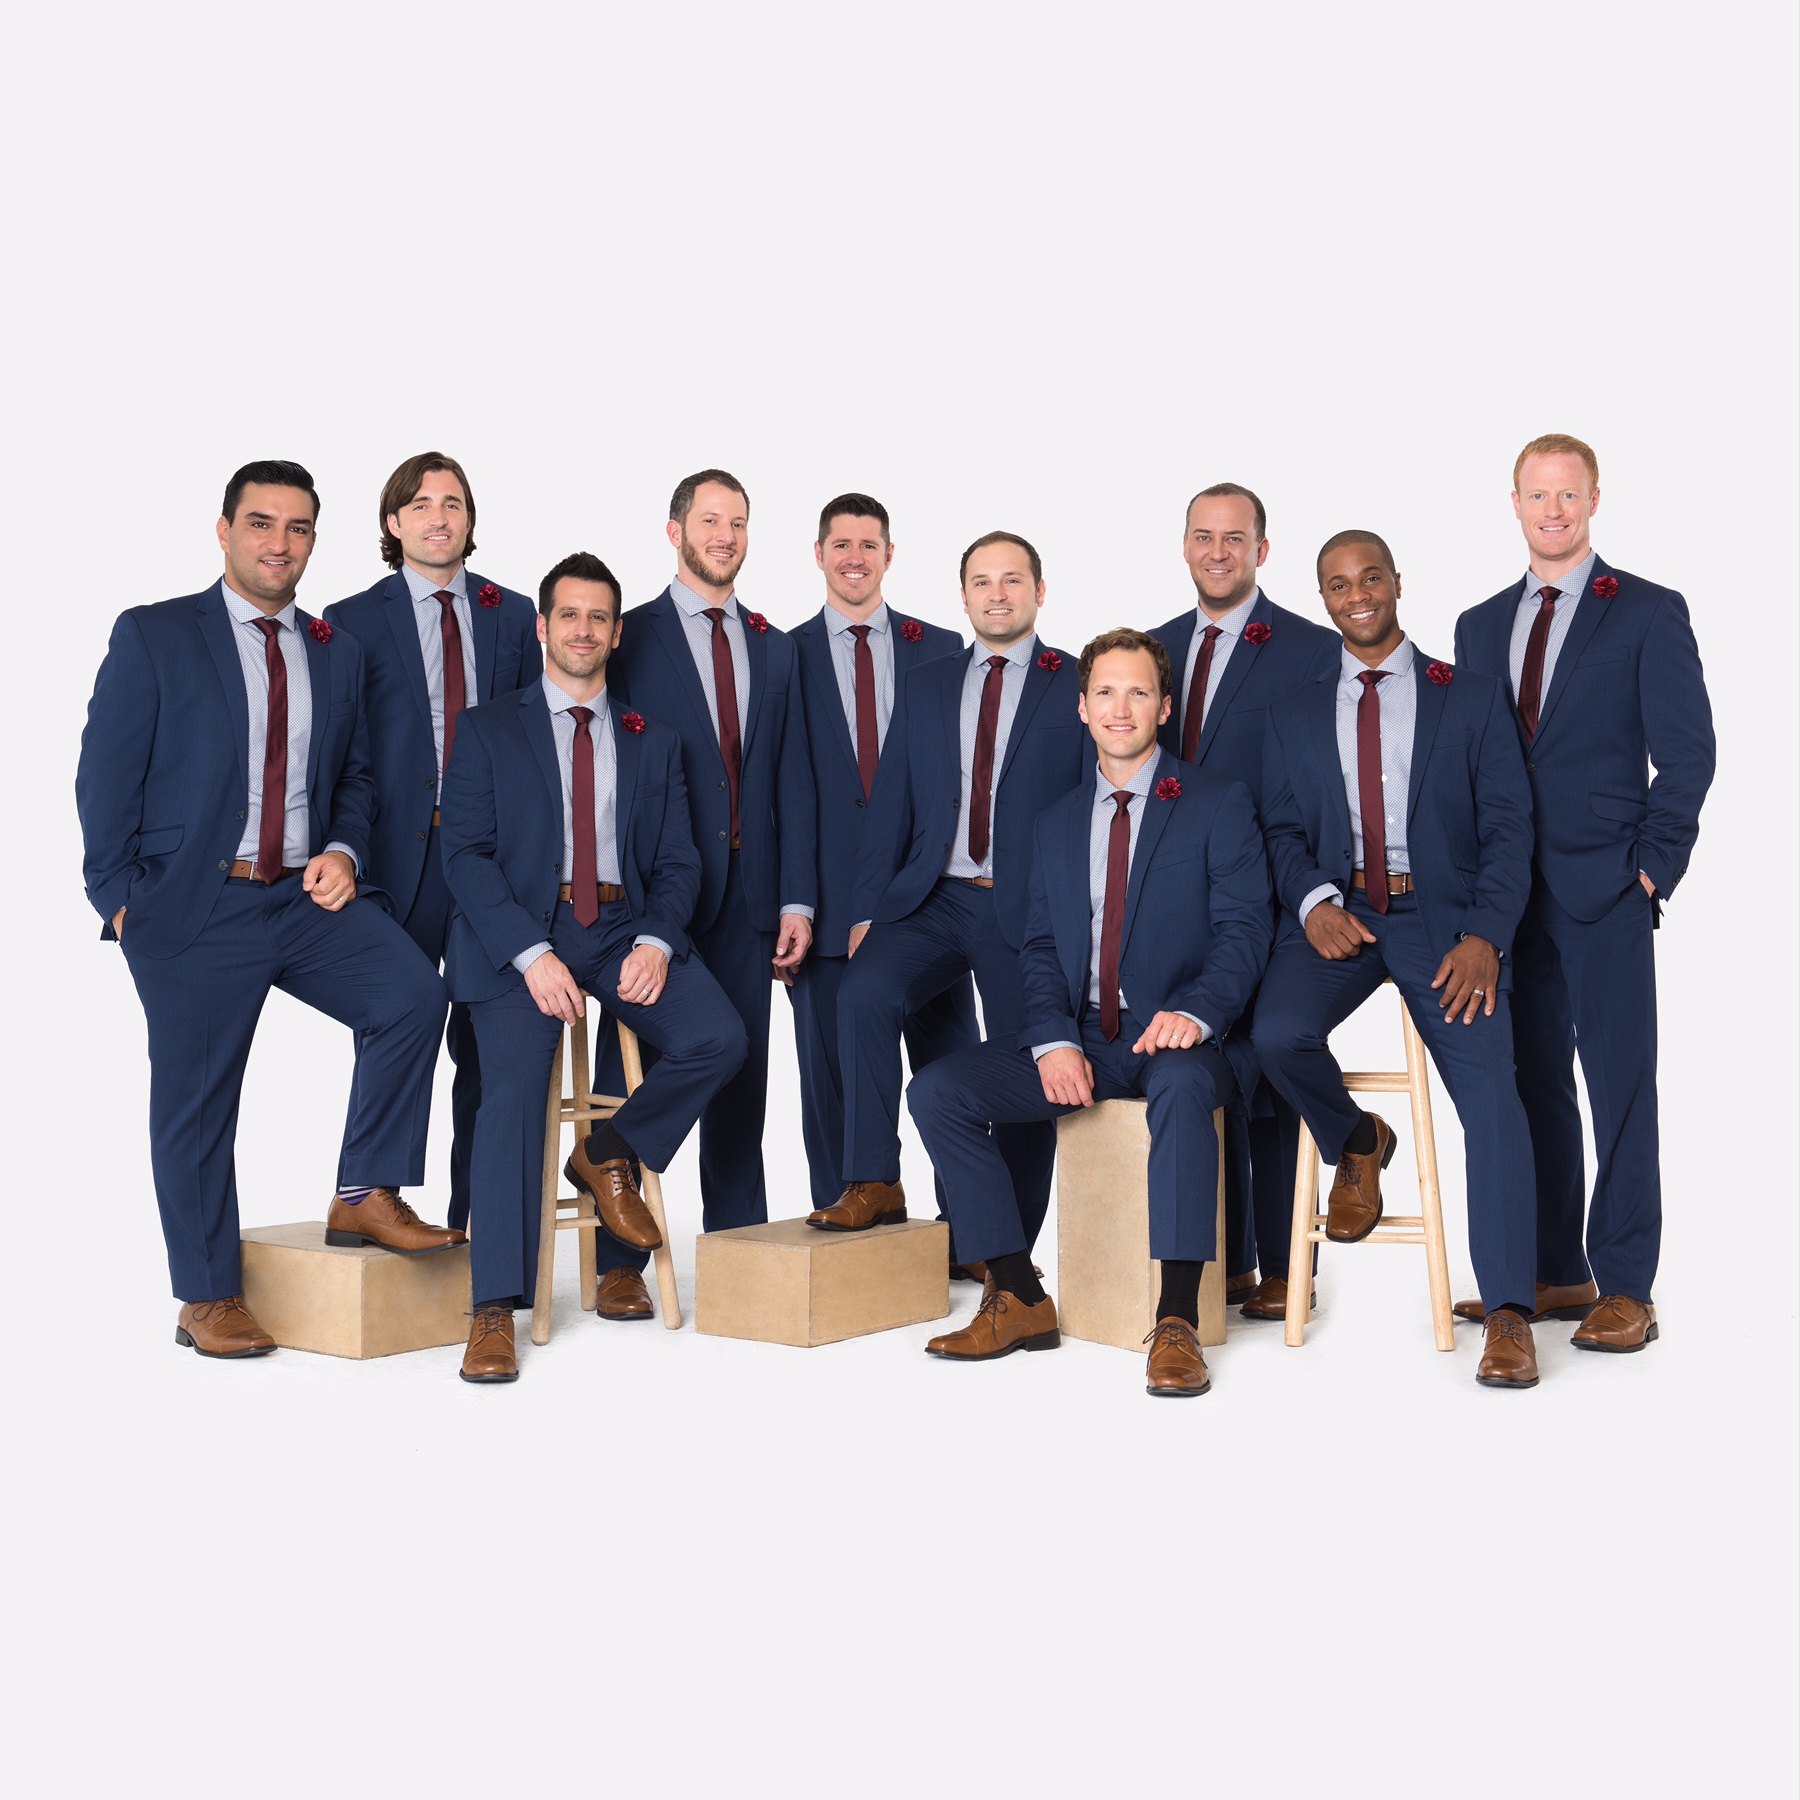 Straight No Chaser Tickets